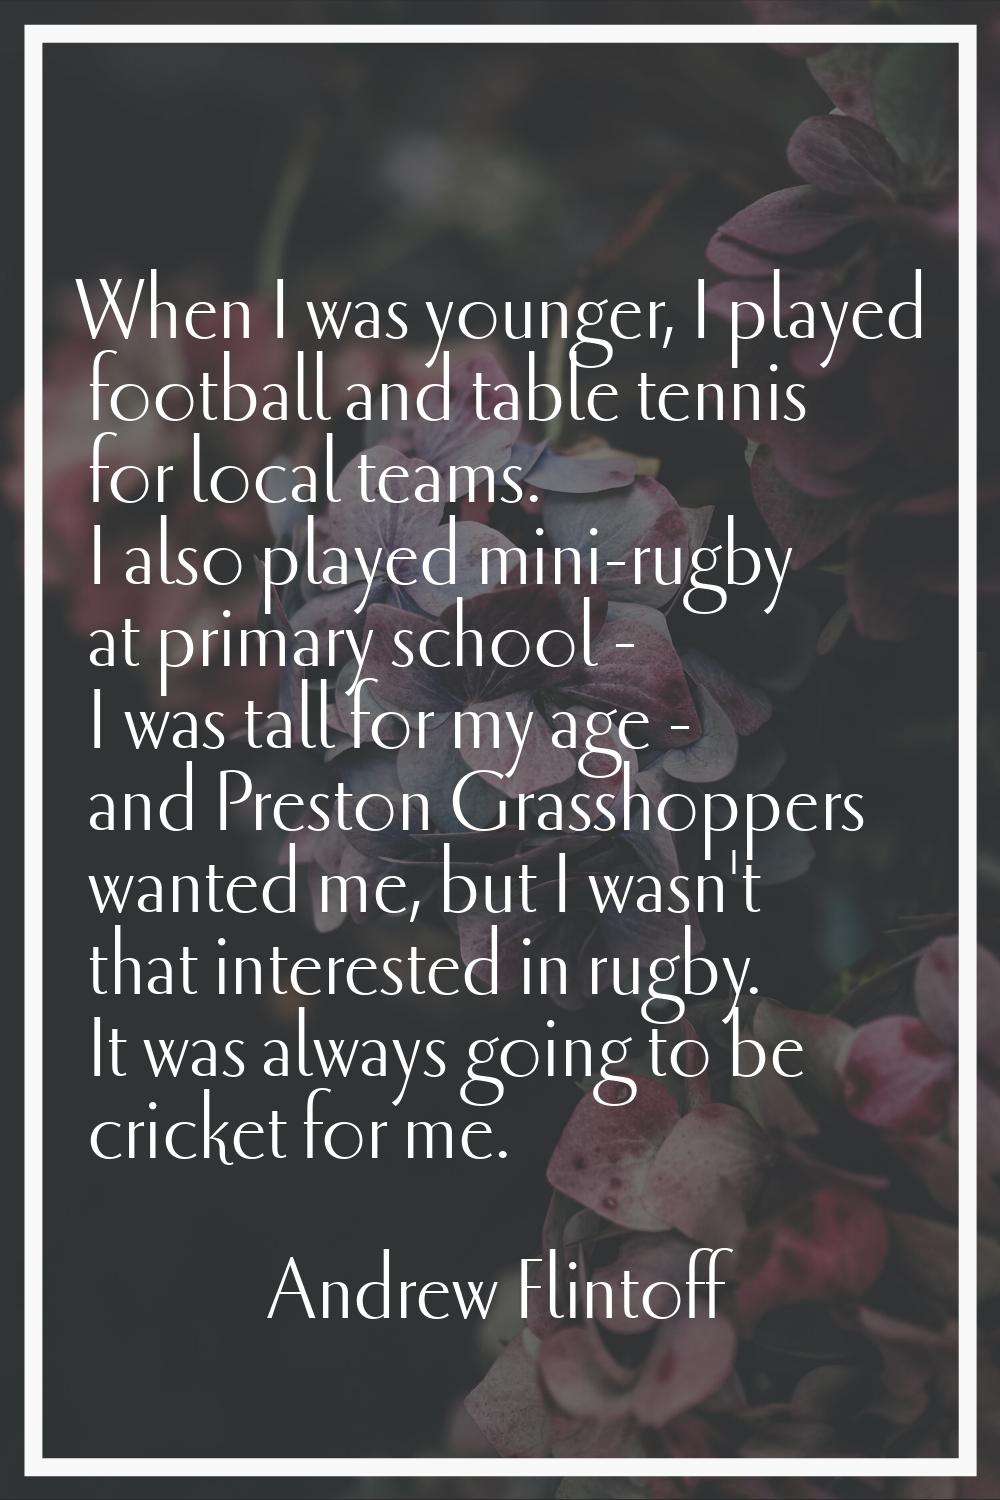 When I was younger, I played football and table tennis for local teams. I also played mini-rugby at